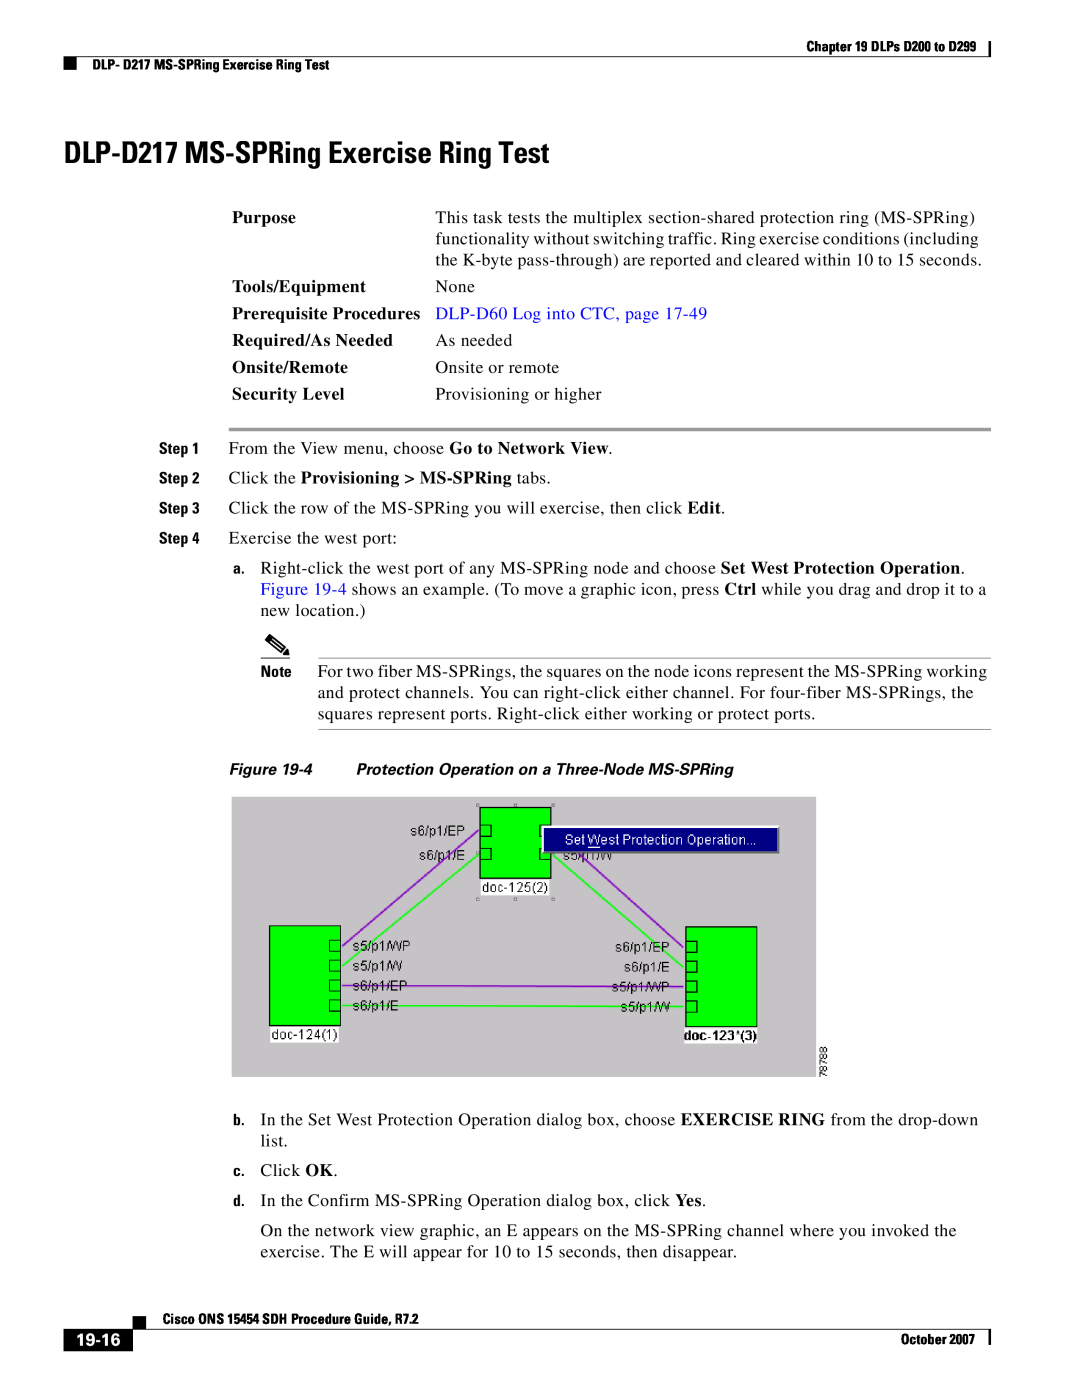 Cisco Systems D200 manual DLP-D217 MS-SPRing Exercise Ring Test, 19-16, DLP-D60 Log into CTC, page 